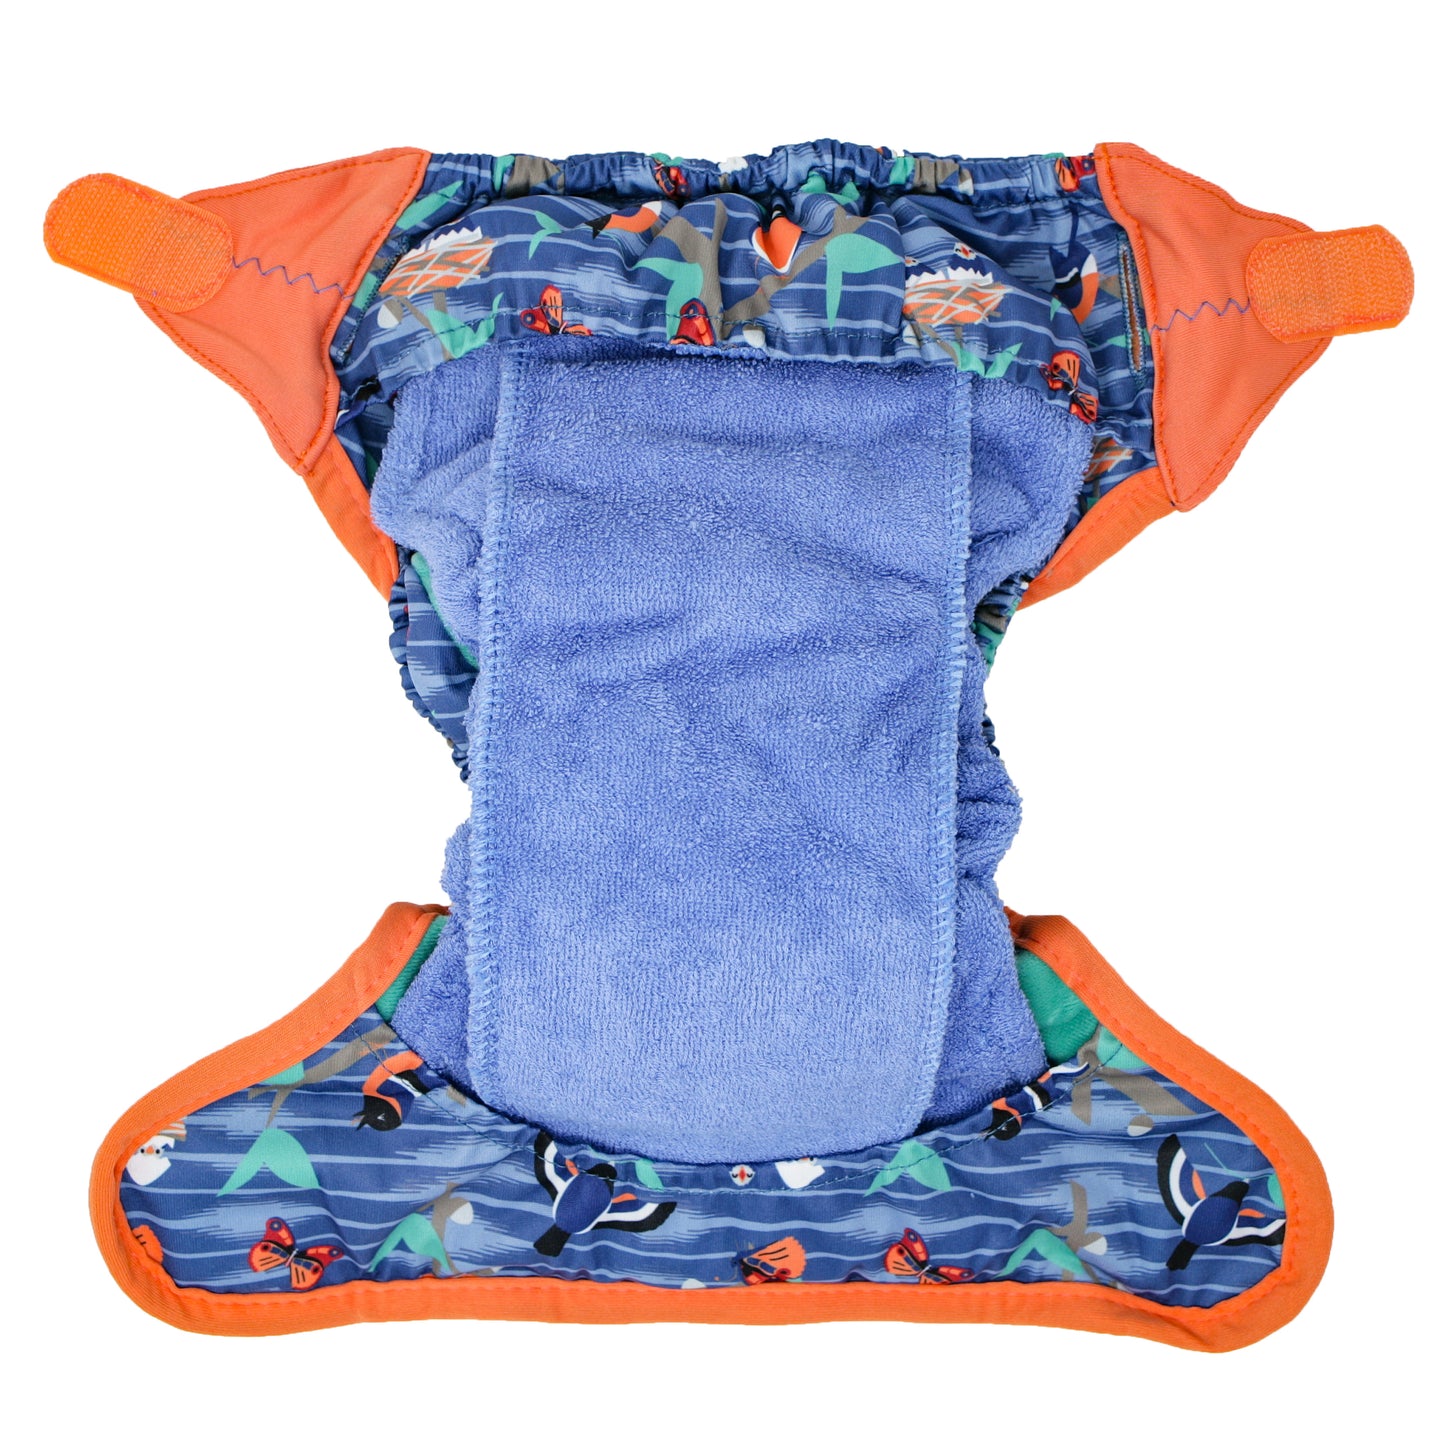 Inside Of Blue Orange Pop-in One Size Twilight Garden Reusable Cloth Nappy, With Velcro Fastening